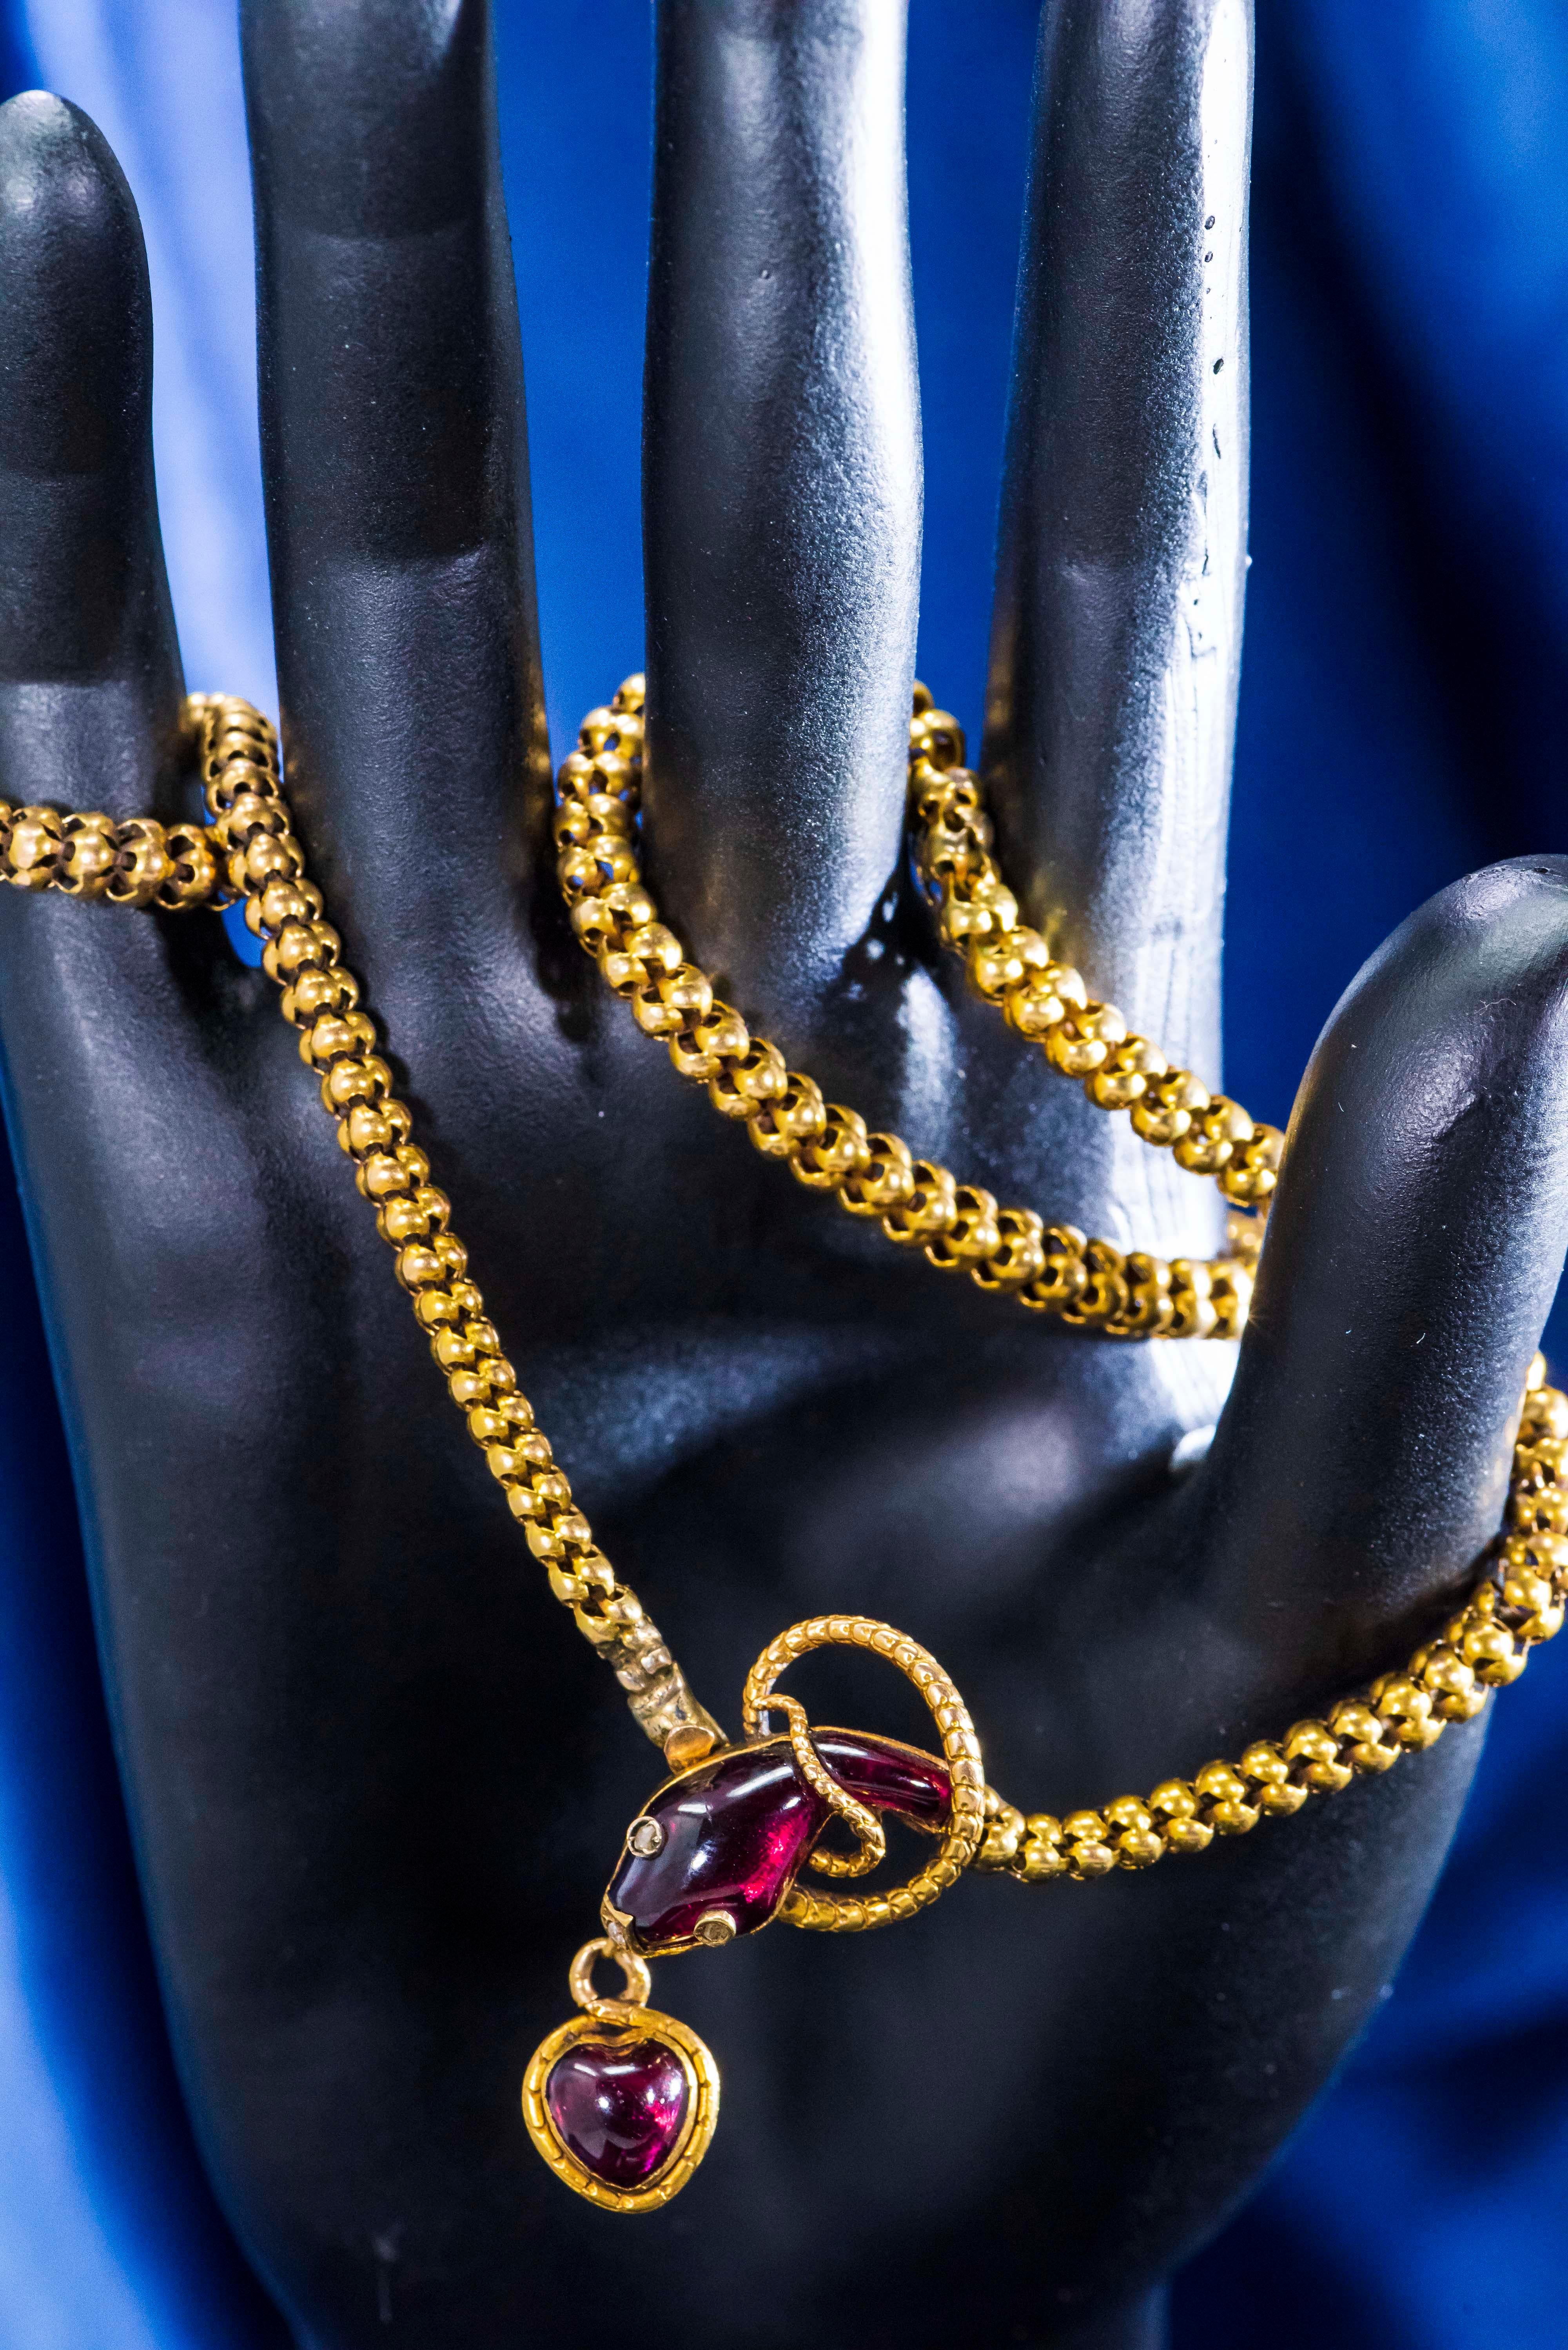 Dimensions
The Circumference, when the clasp is closed: 42.5cm.

Additional Details

The present necklace is a sophisticated Victorian era gold necklace circa 1850-1880, designed as a finely carved almandine garnet snake head holding an almandine